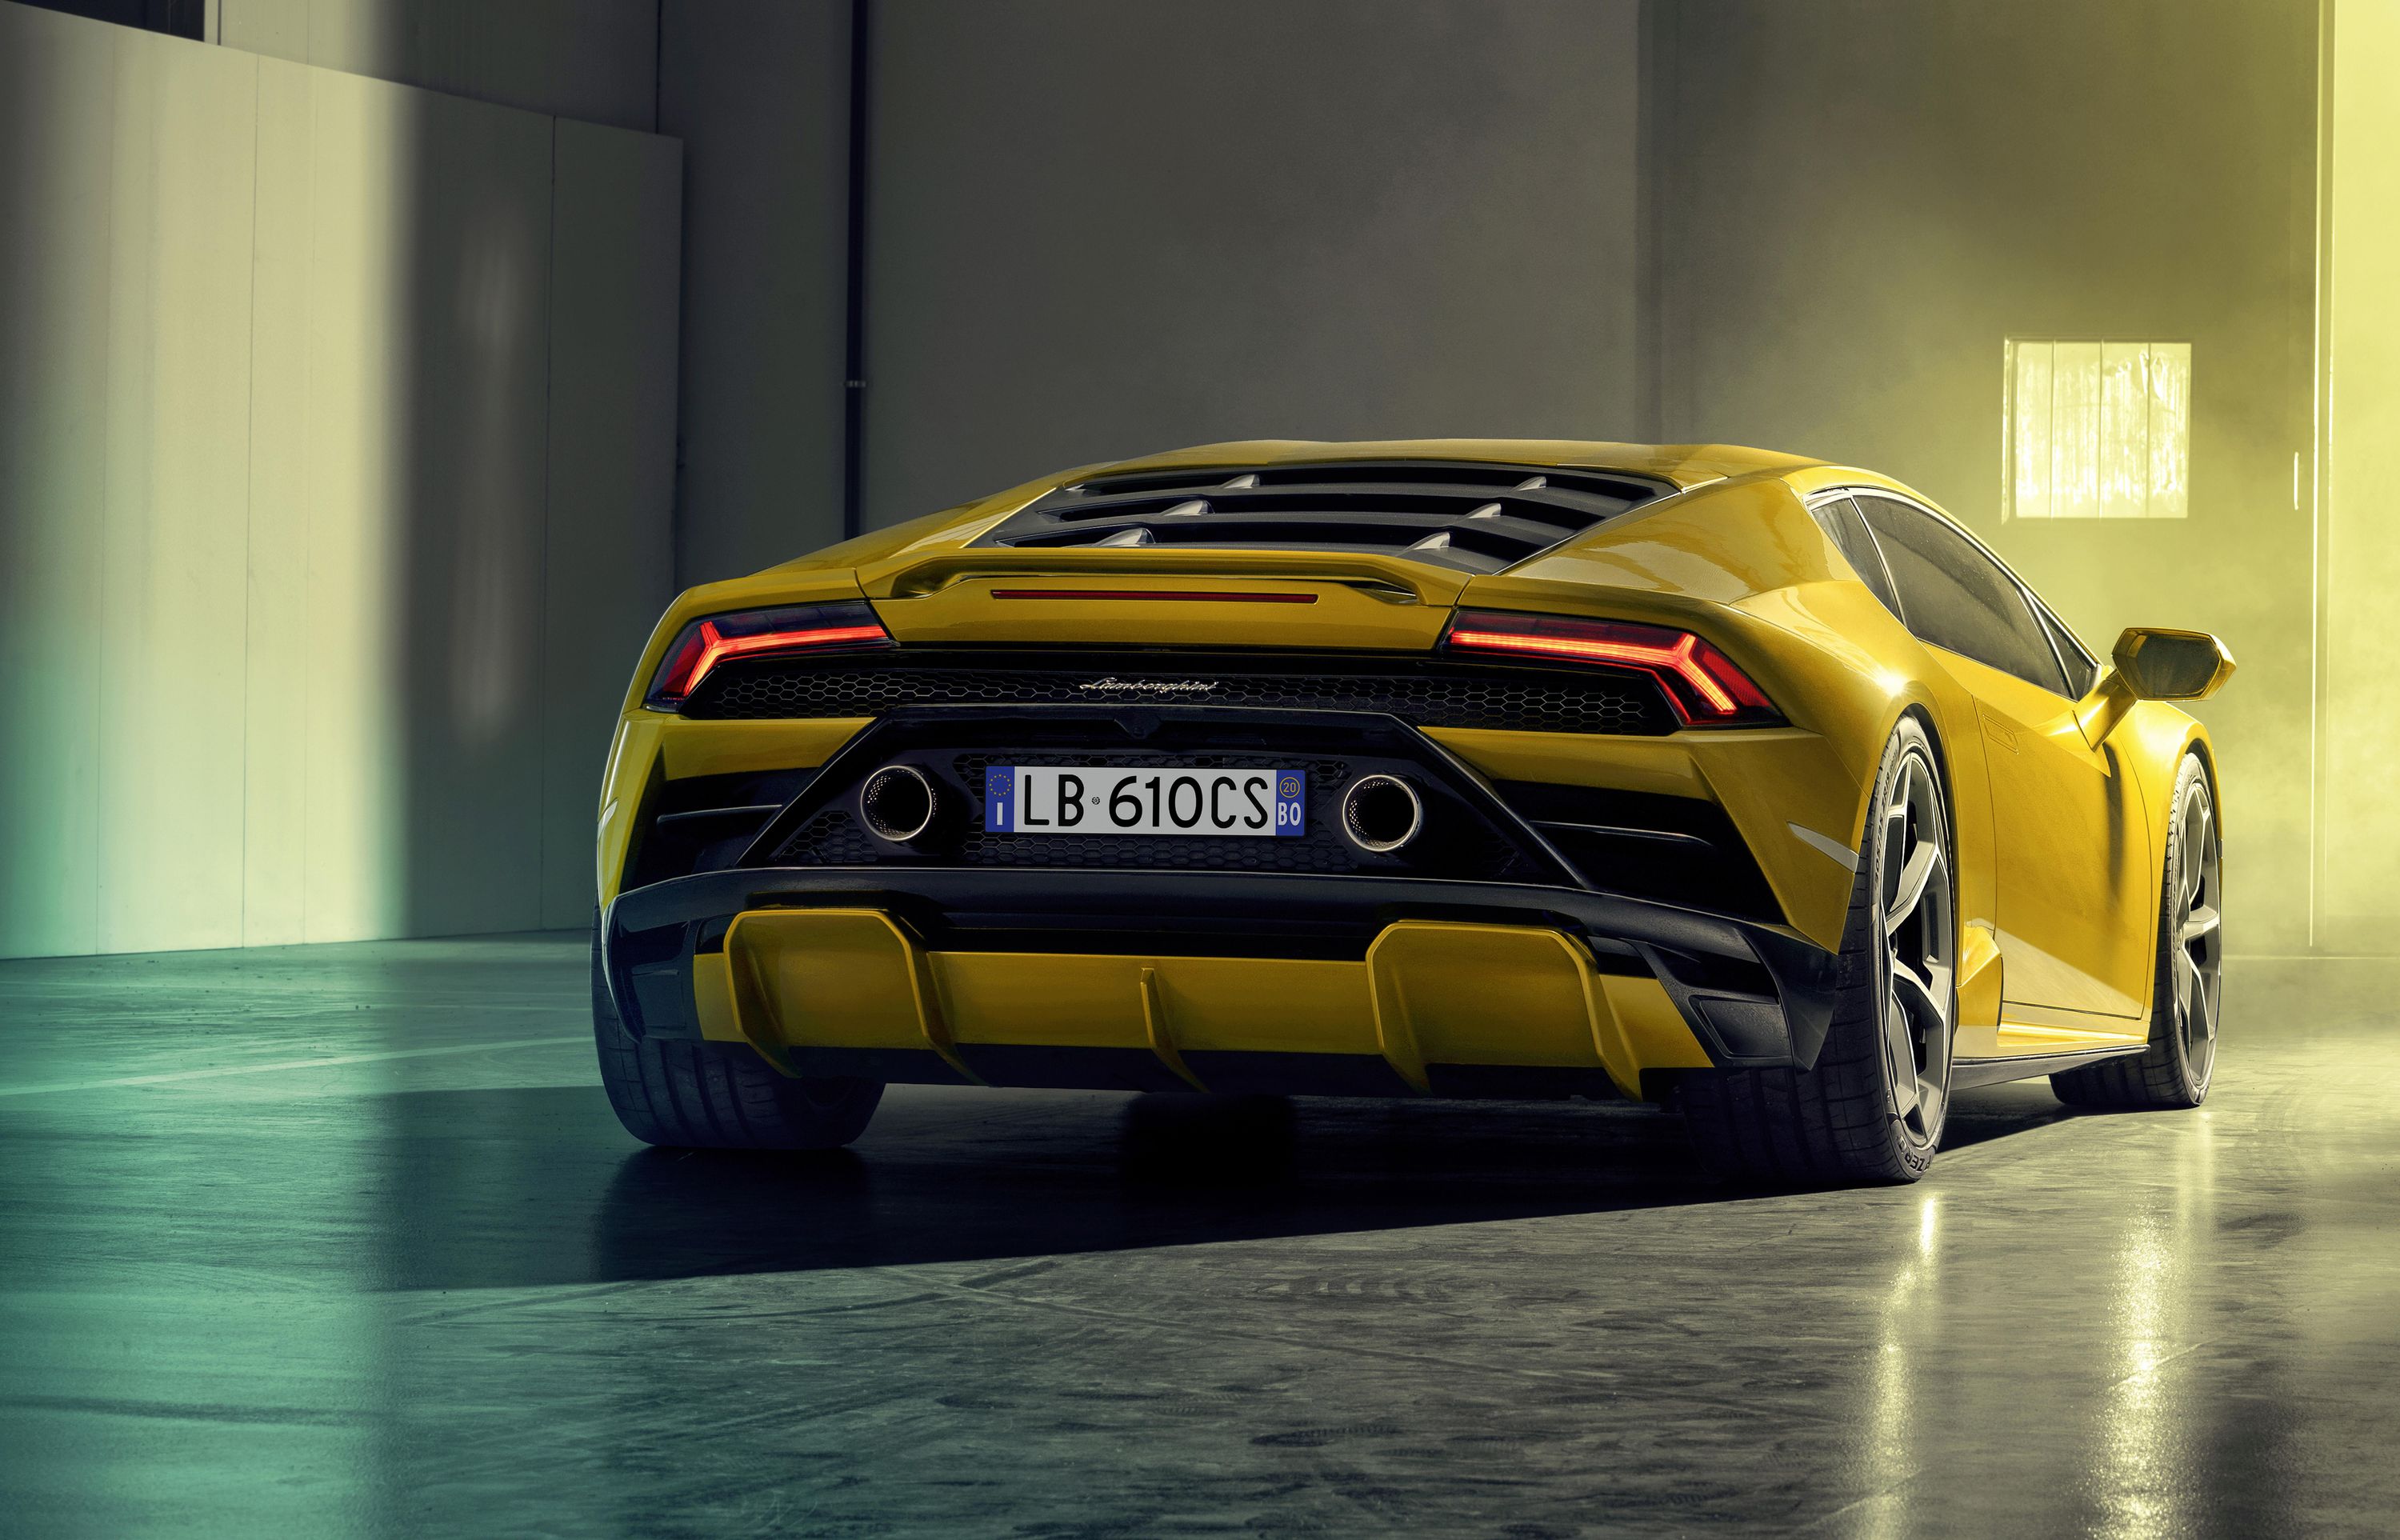 The newest Lamborghini Huracán is born to drift, thanks to RWD